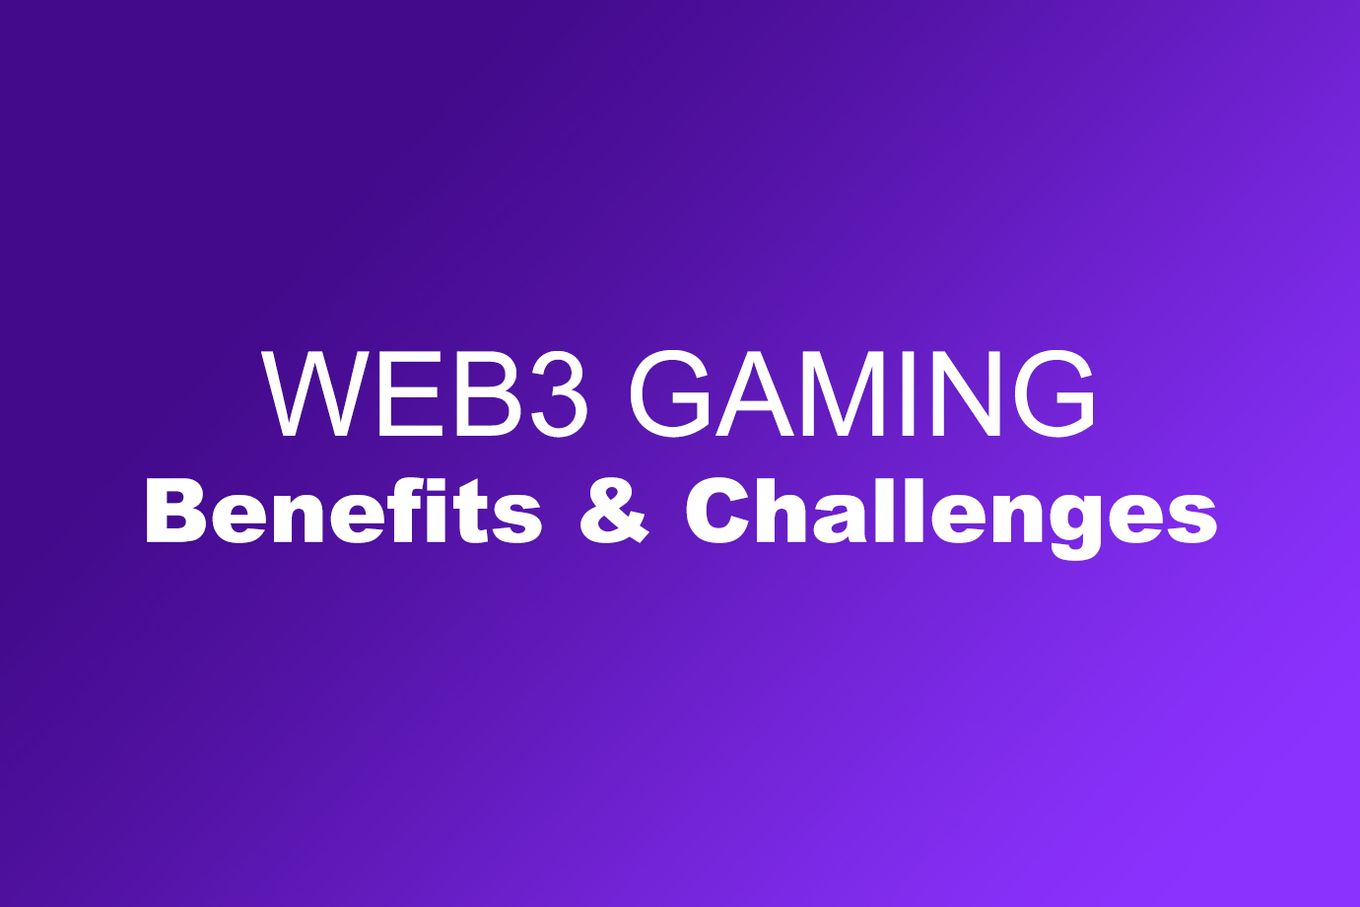 Web 3 Gaming - Benefits and Challenges